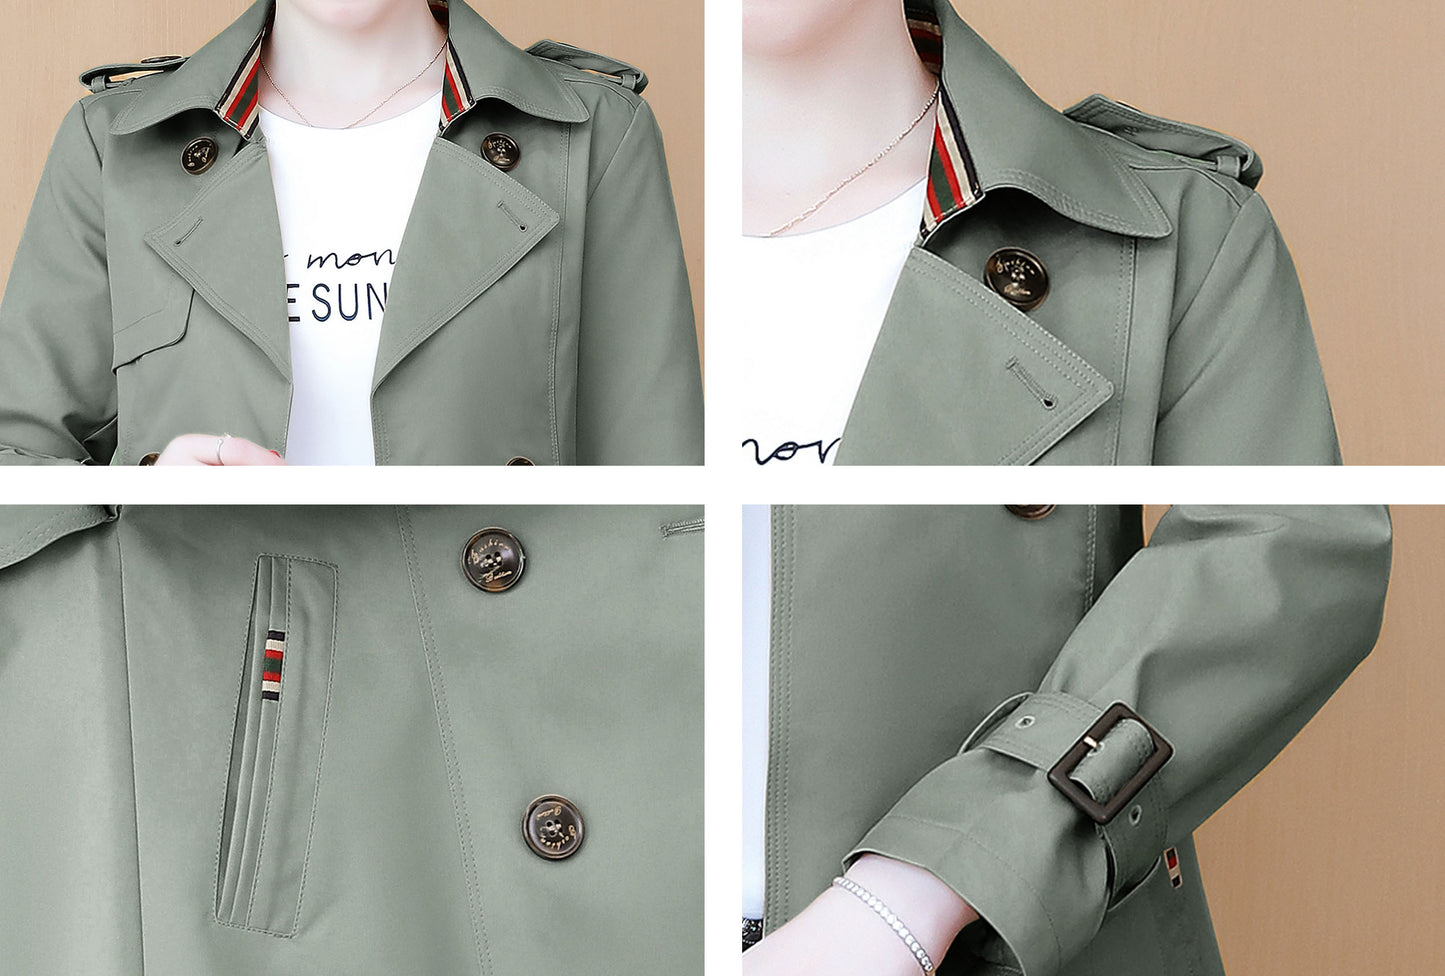 Women 3/4 Length Outerwear Trench Coat with Belt